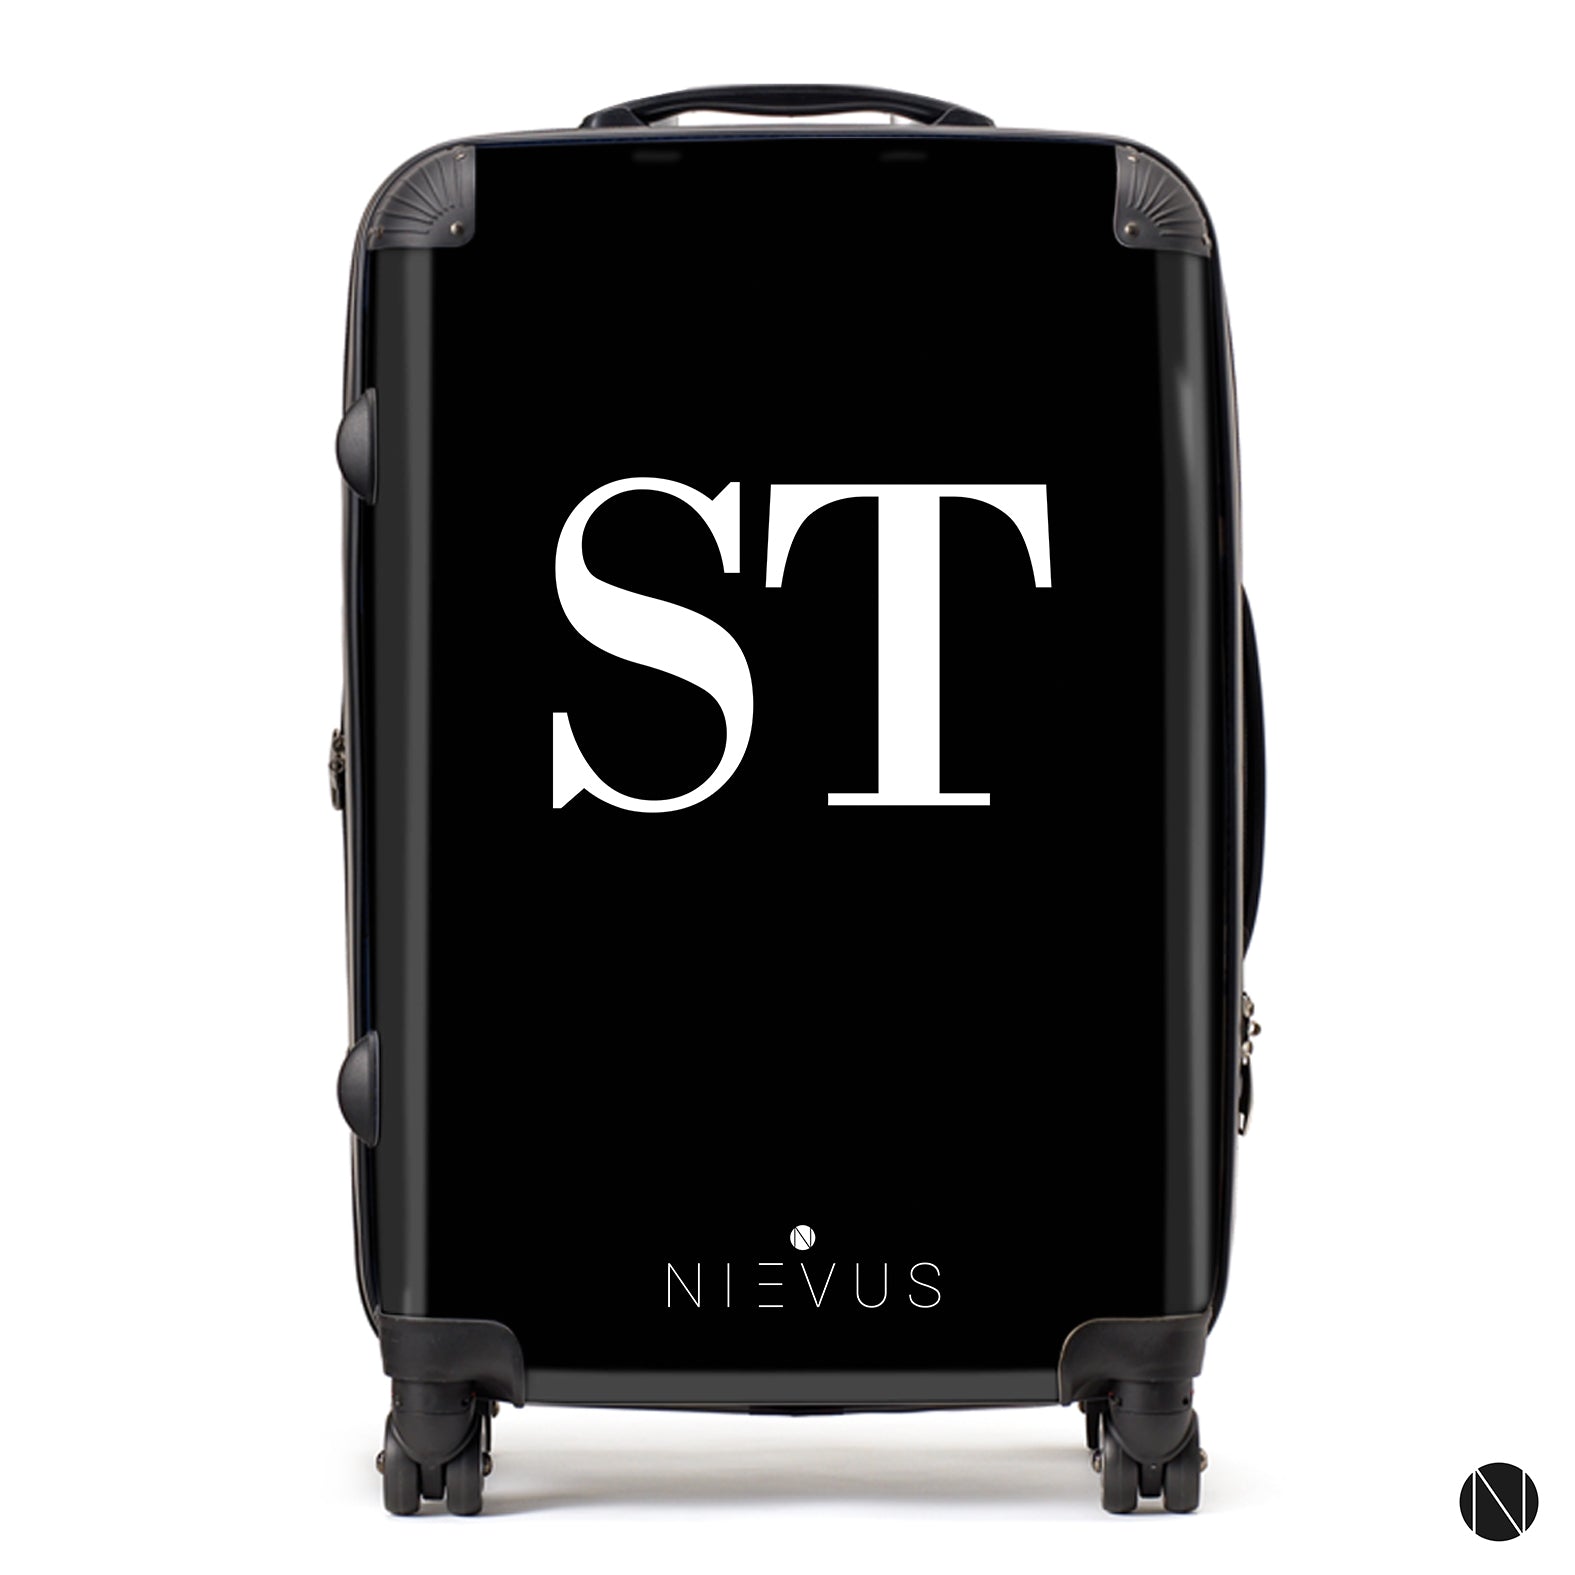 The Personalised Initials Suitcase - Black & White Edition